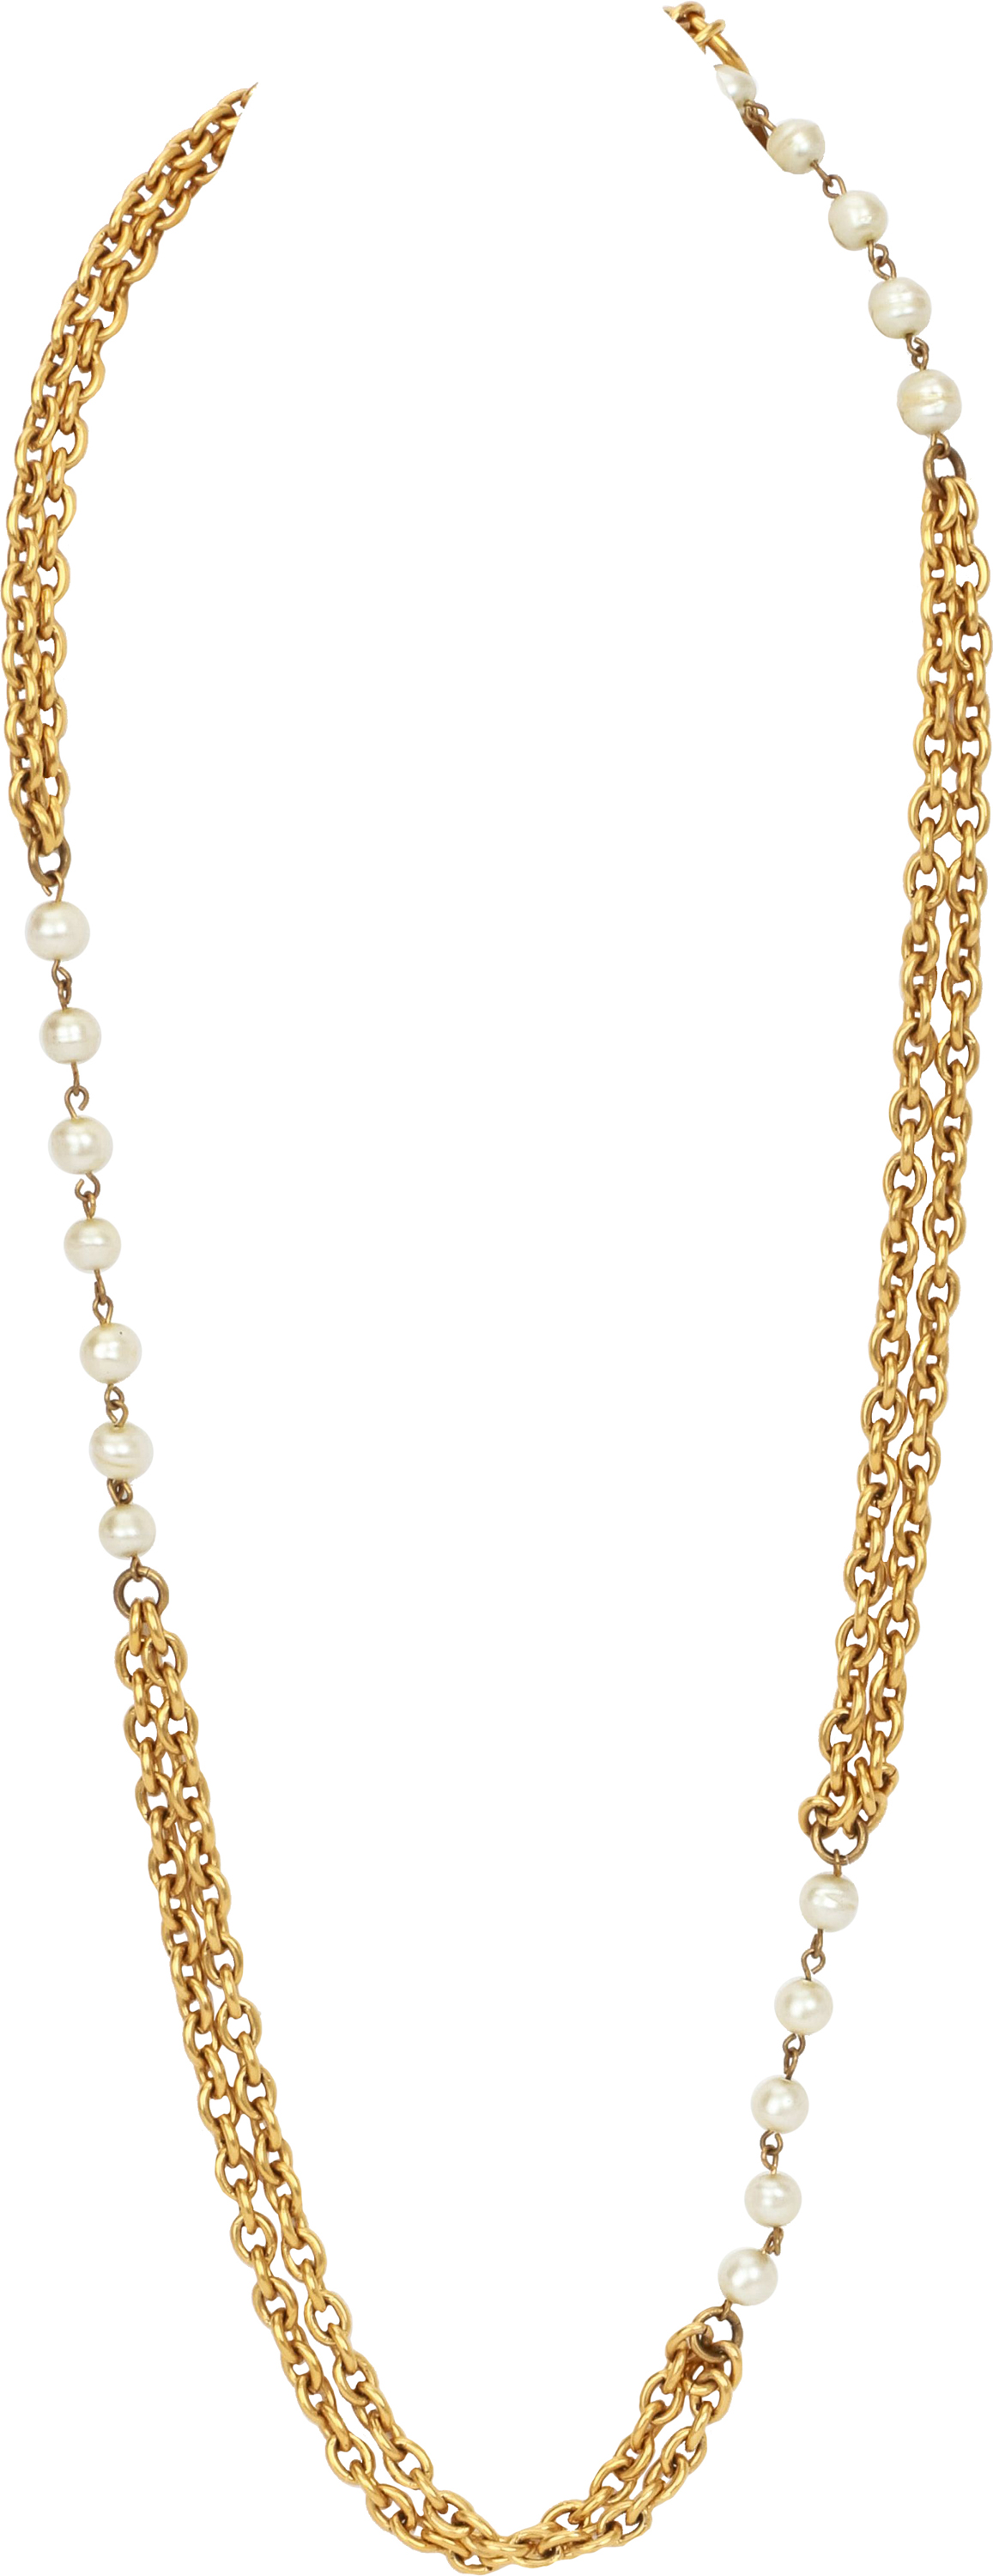 Chanel sautoir gold pearl chain necklace~P77633452